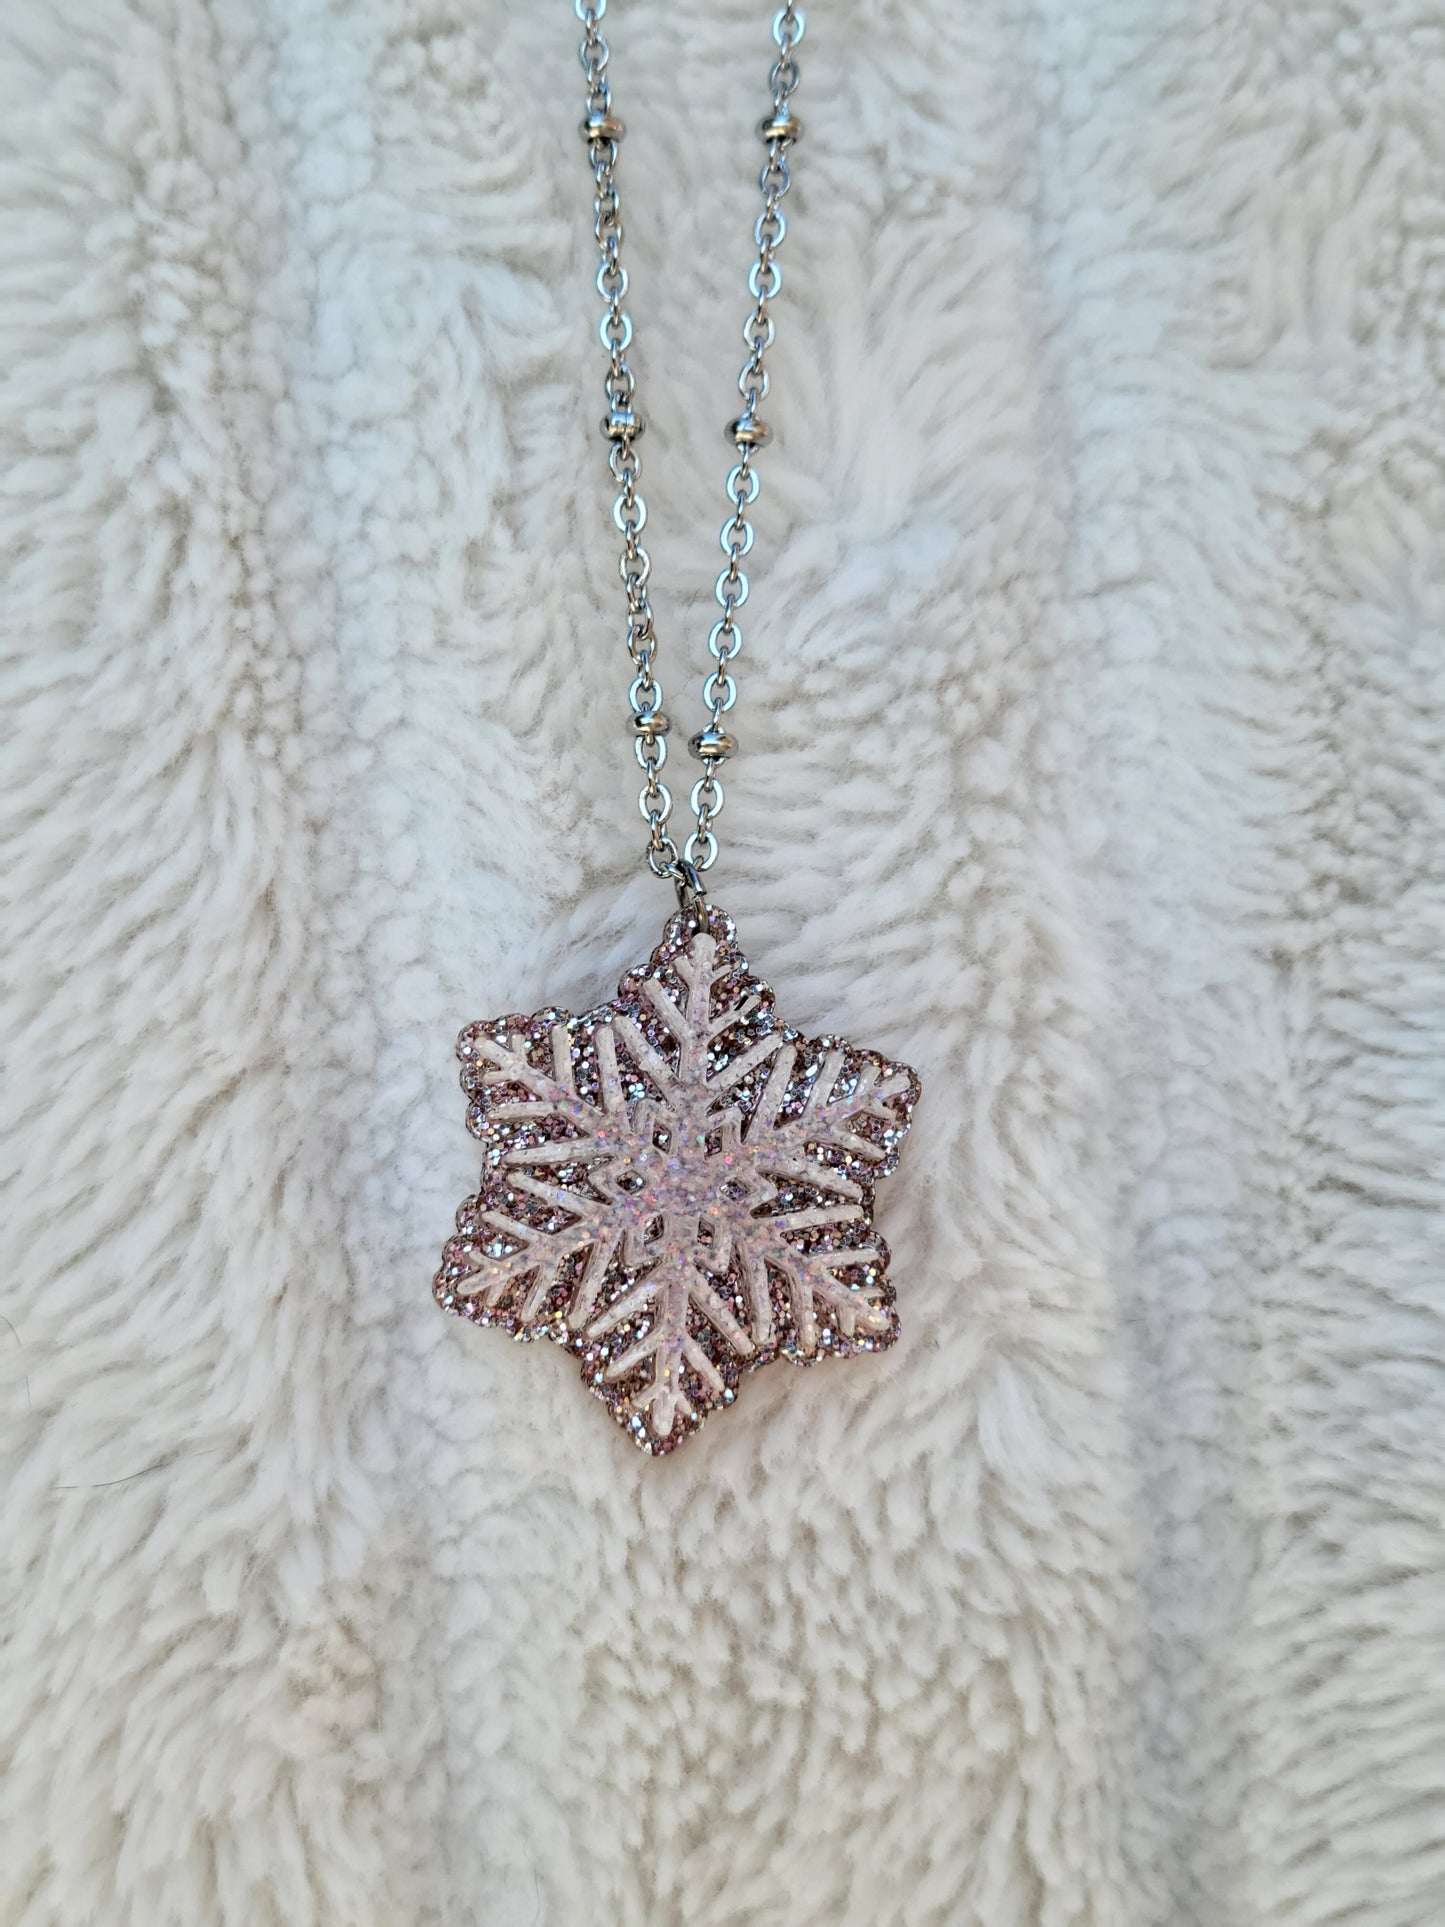 Snowflake Necklace | Winter Necklace | Snow Queen Jewelry | Christmas Jewelry |